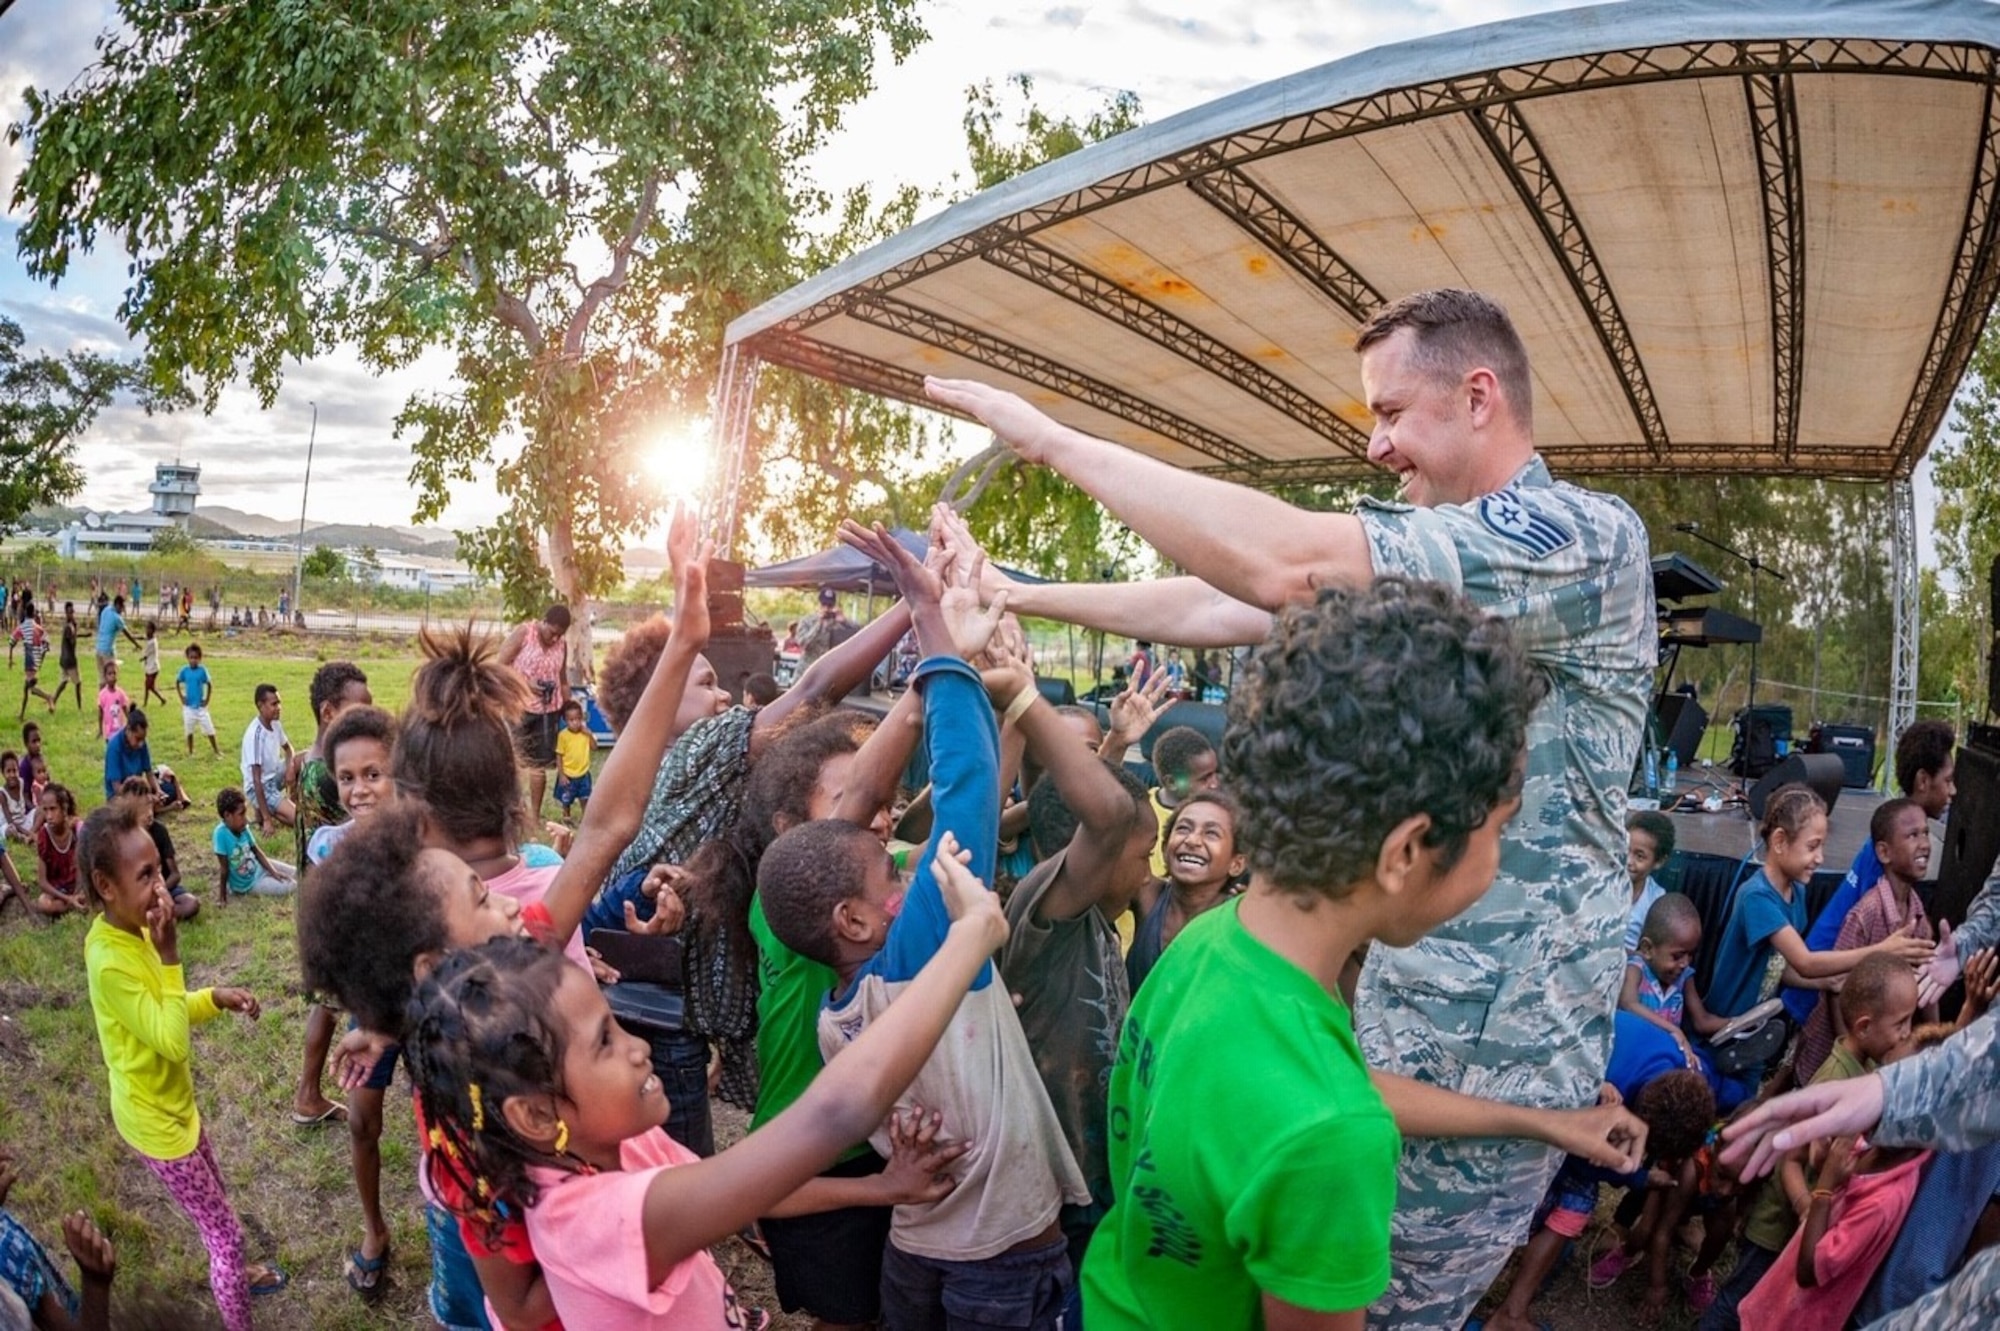 Staff Sgt Bryan Andrews gives high-fives to young audience members in Papua New Guinea at a performance for members of the Papua New Guinea Defence Force Air Transport Wing and their families.